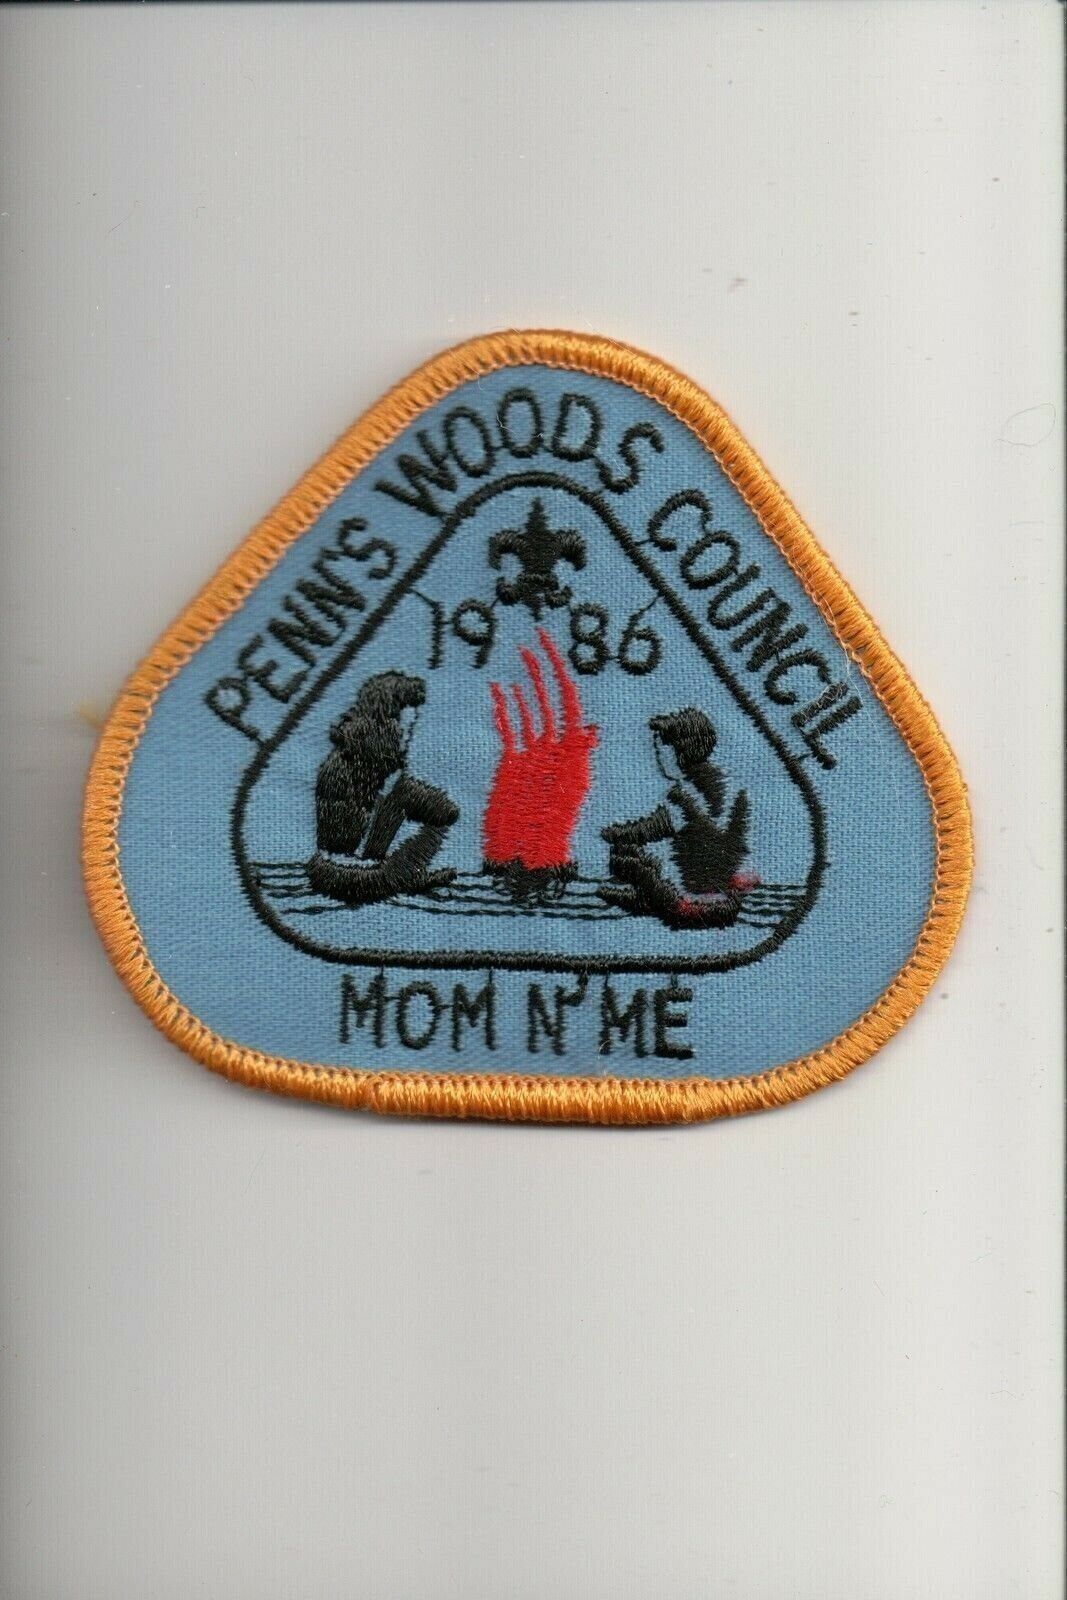 1986 Penn\'s Woods Council Mom N\' Me patch